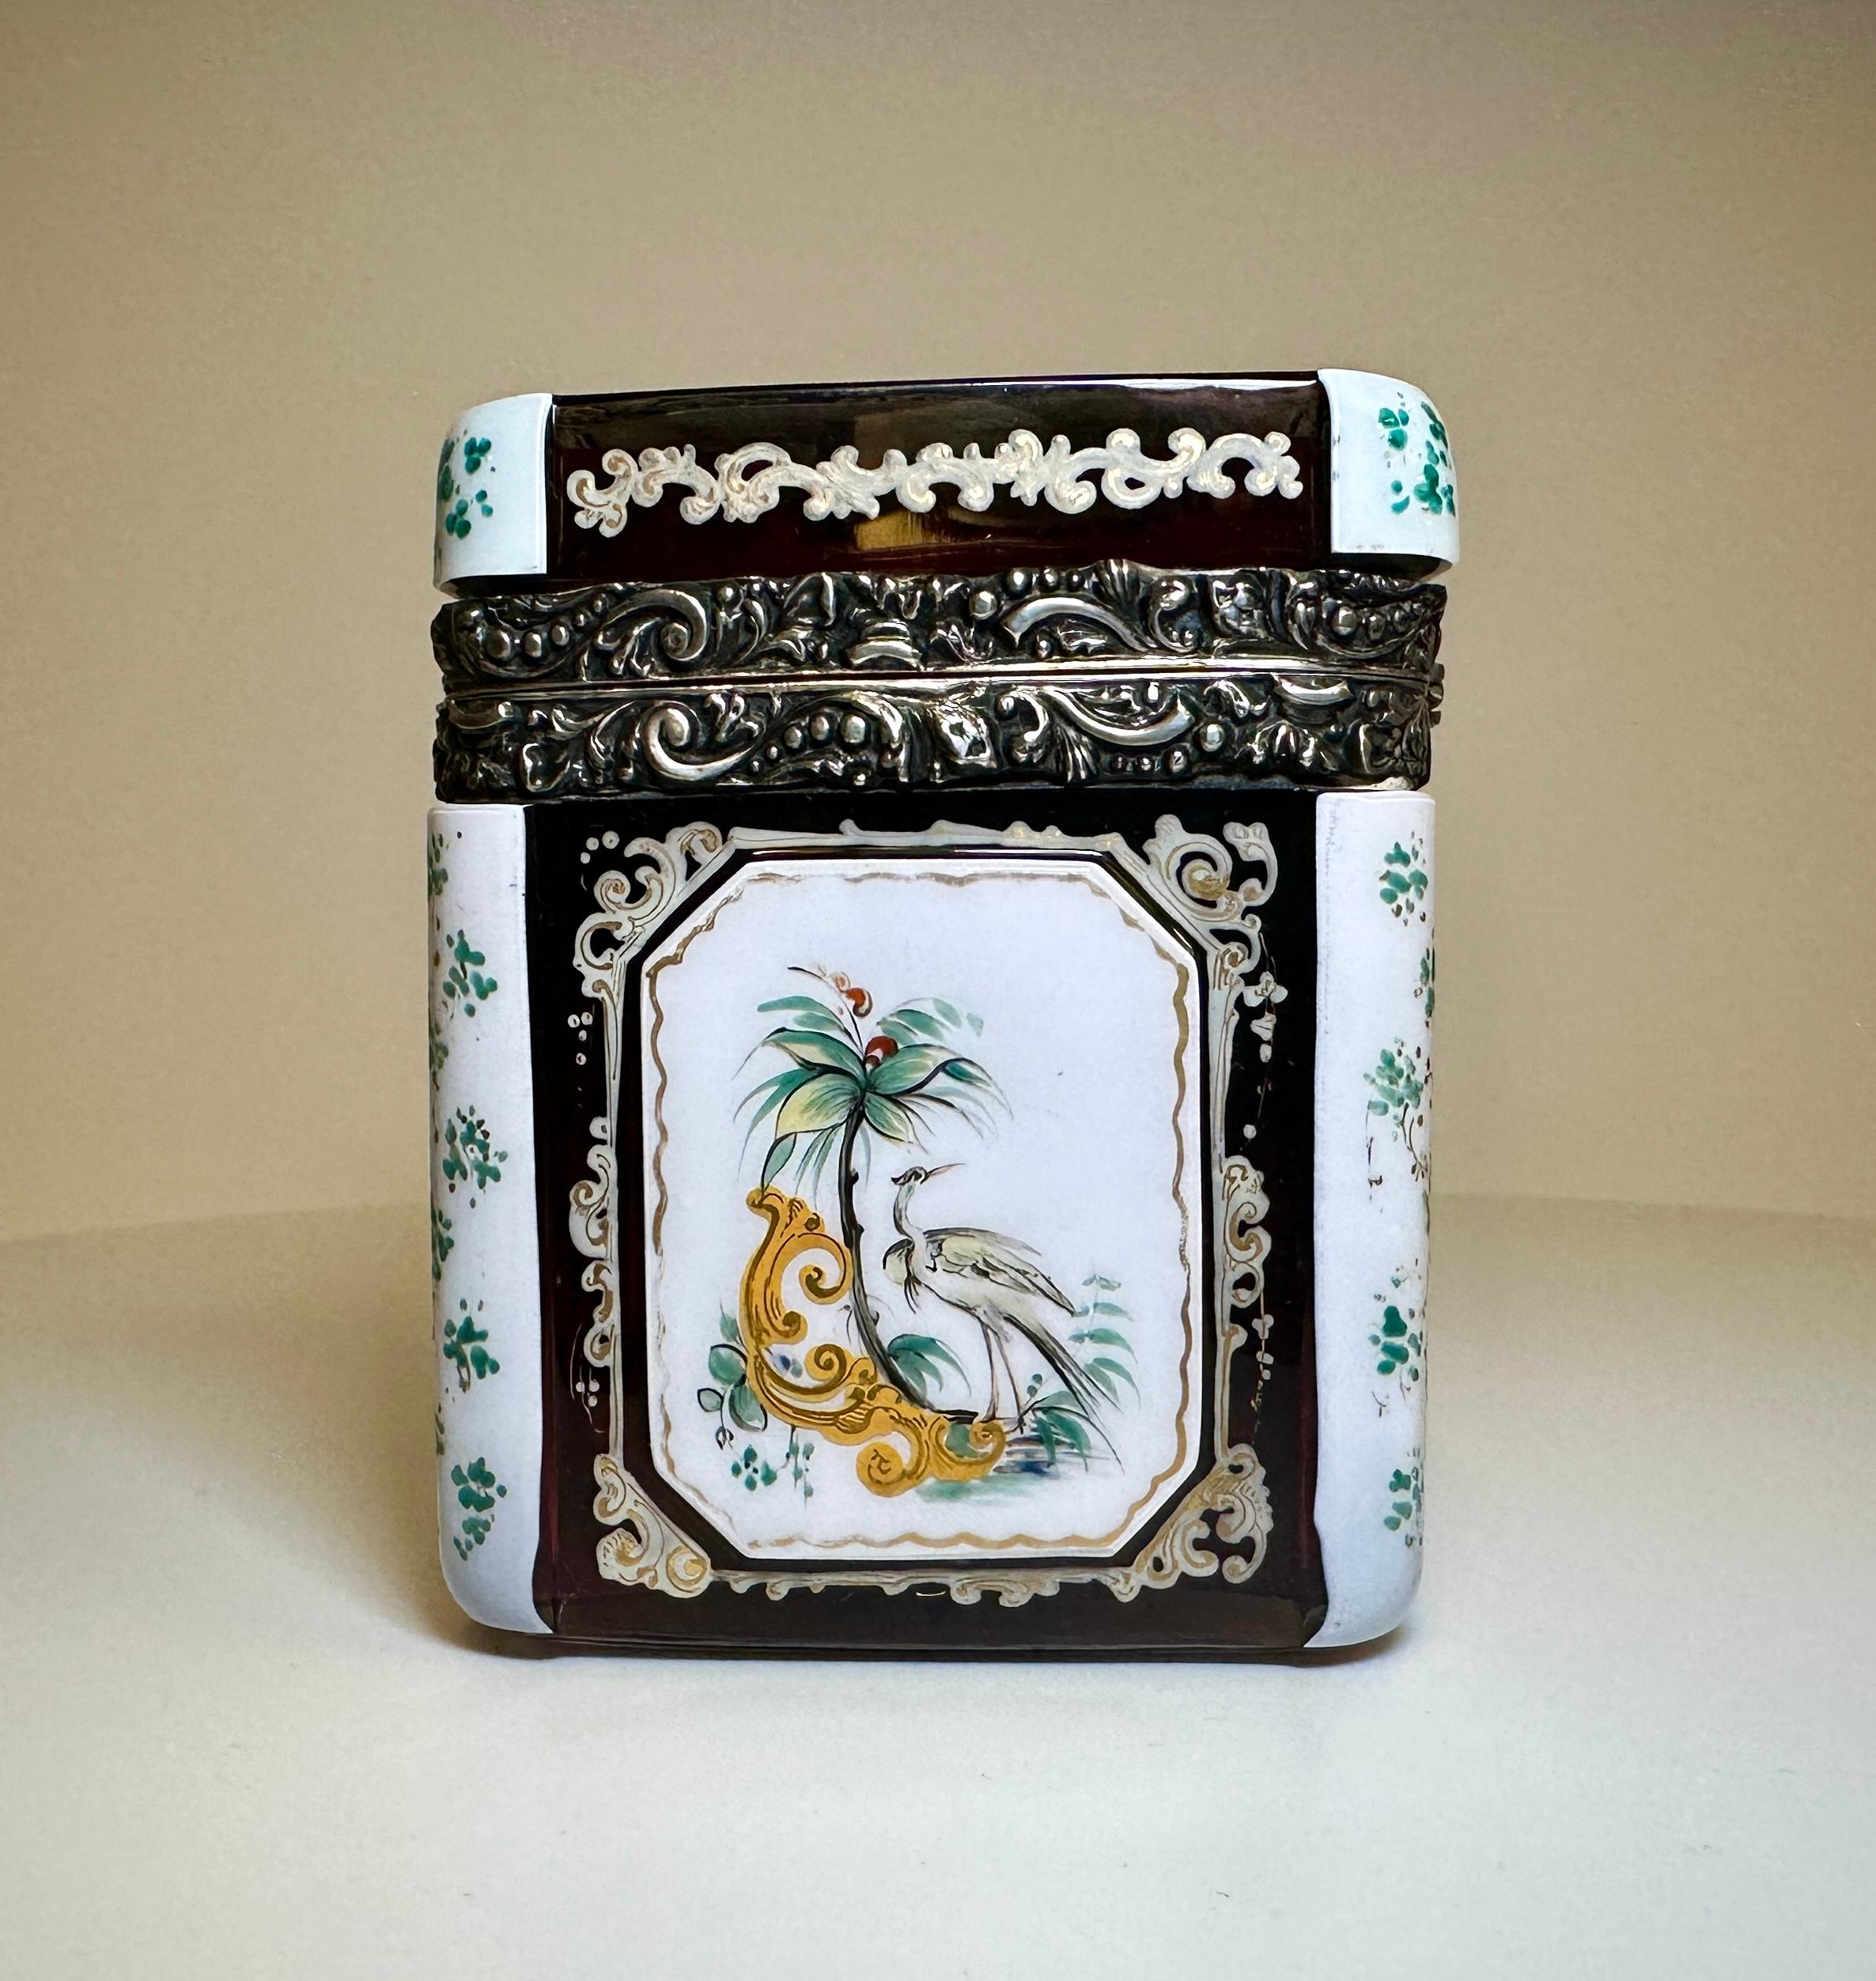 Austrian Bohemian Silver-Mounted Overlay and Enameled Box, Dated 1852 For Sale